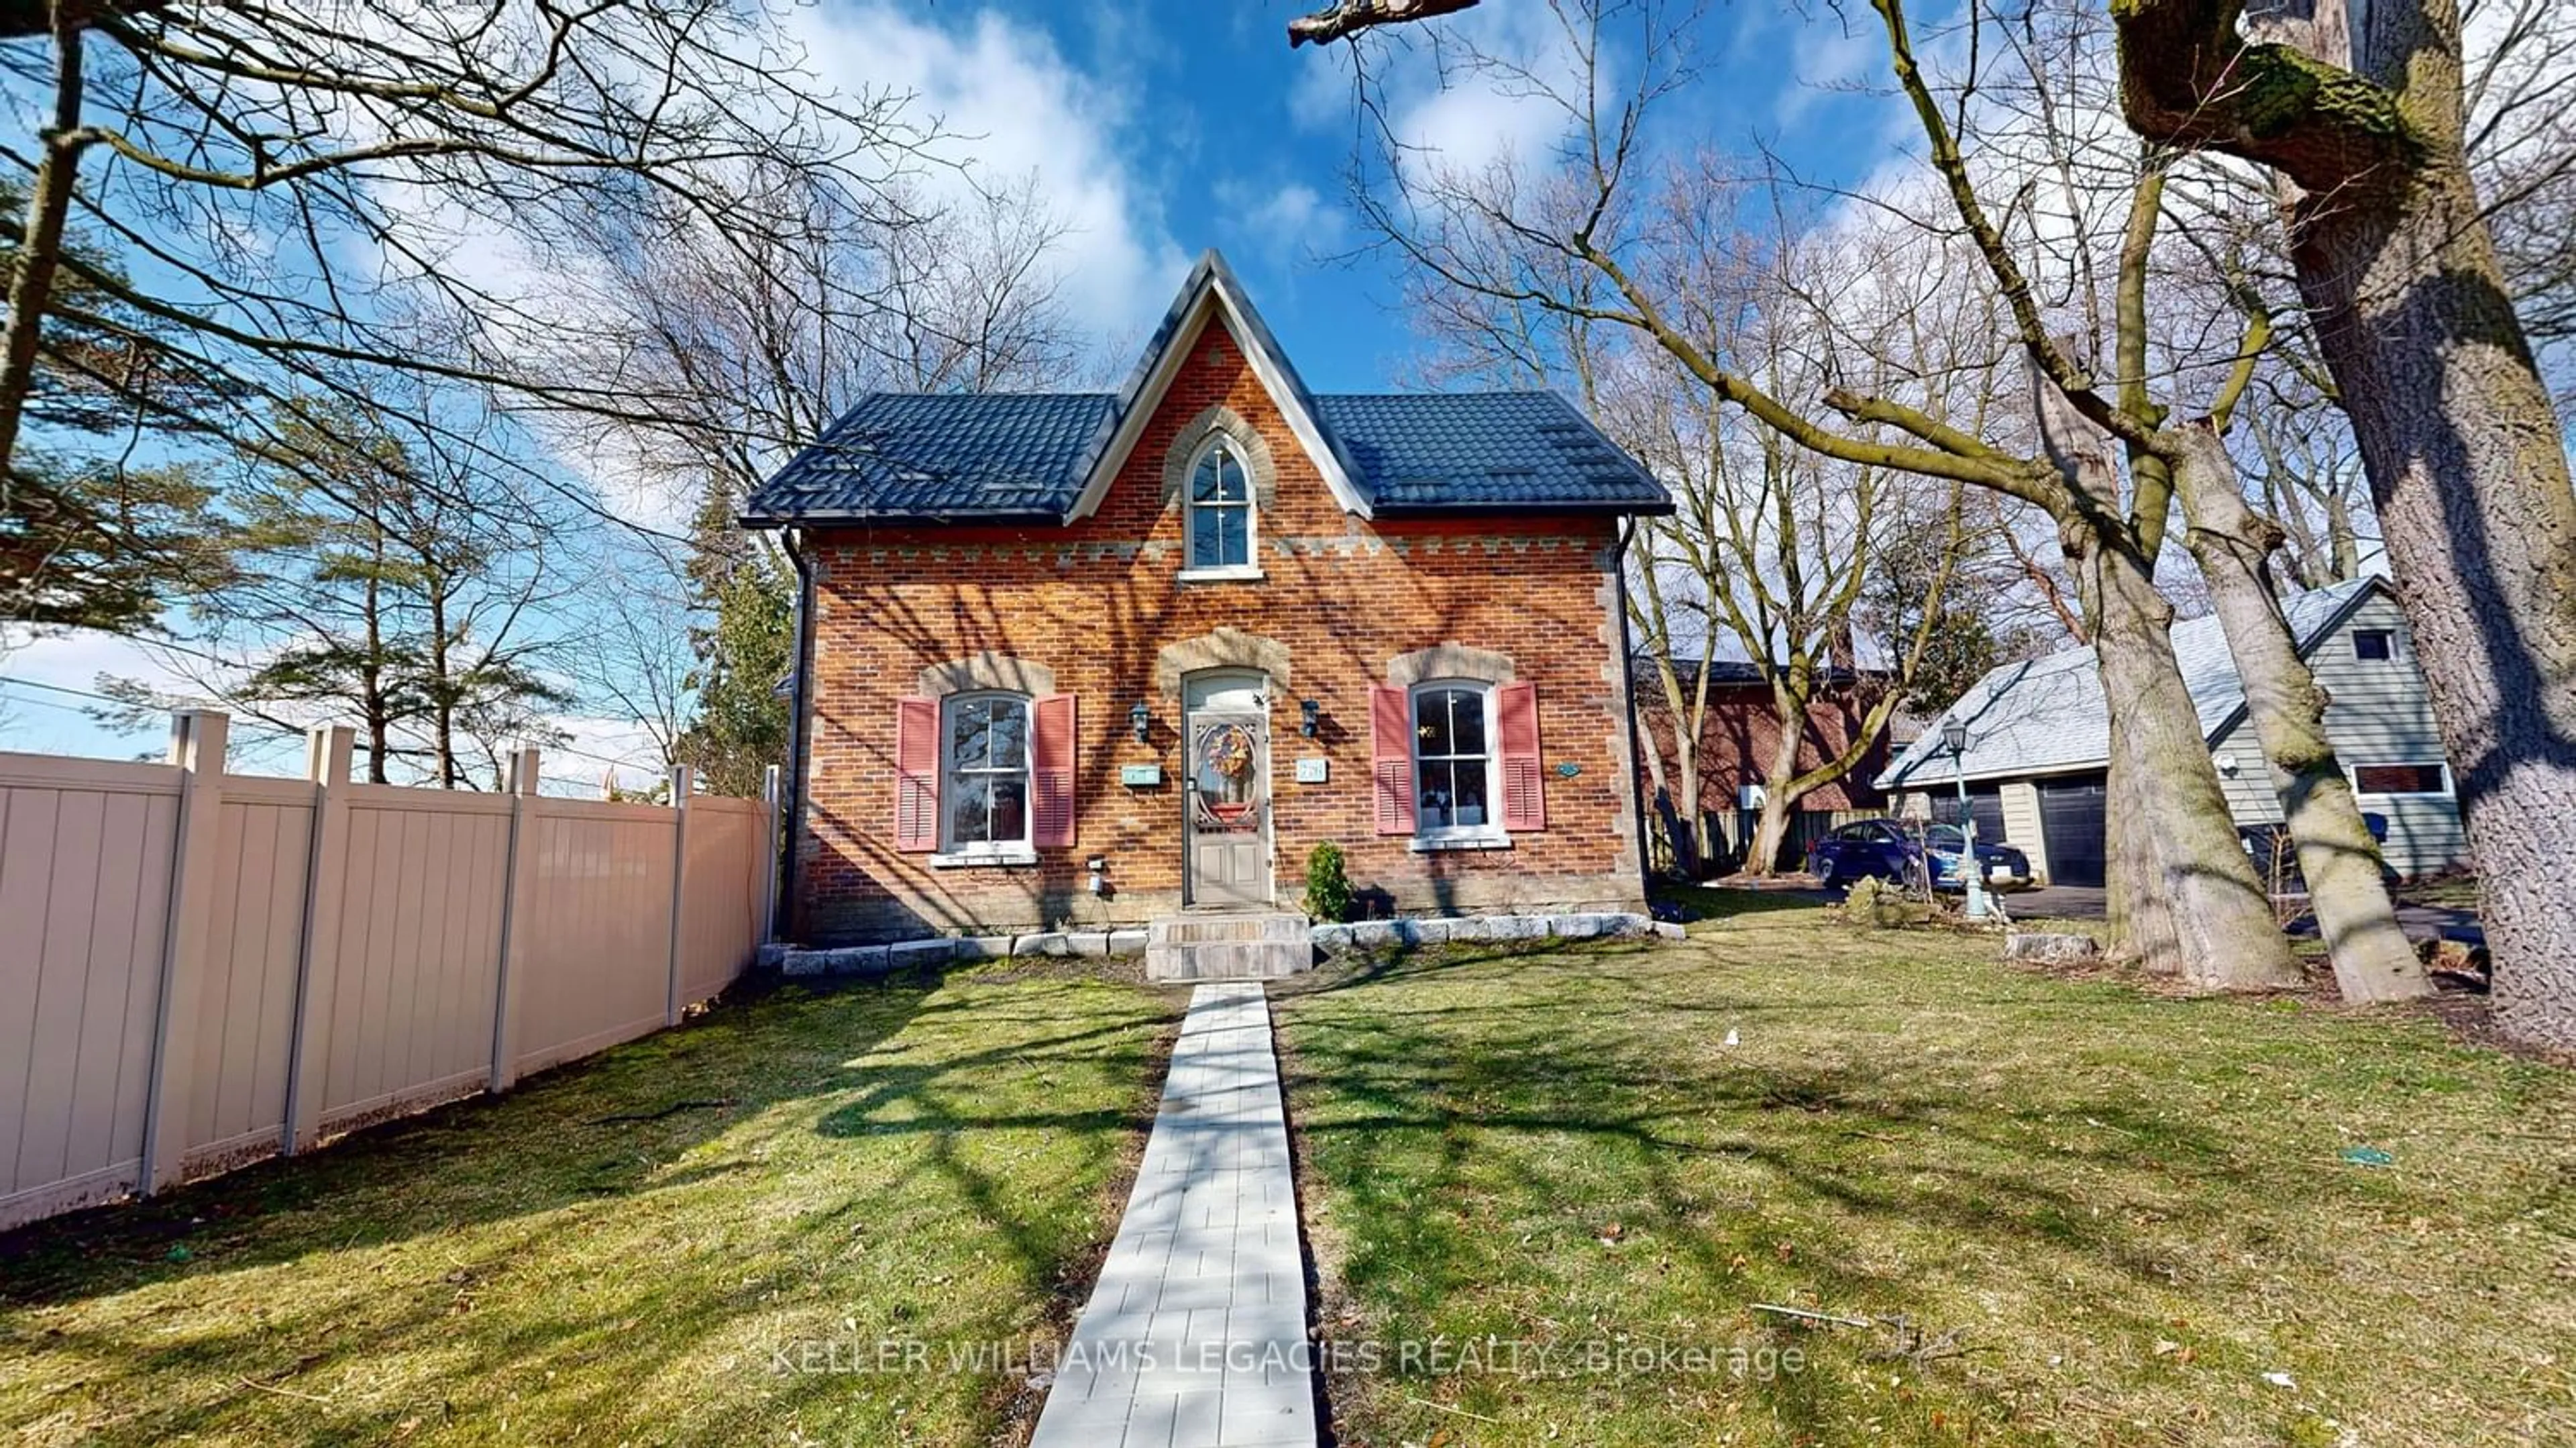 Home with brick exterior material for 726 Meadowvale Rd, Toronto Ontario M1C 1T2